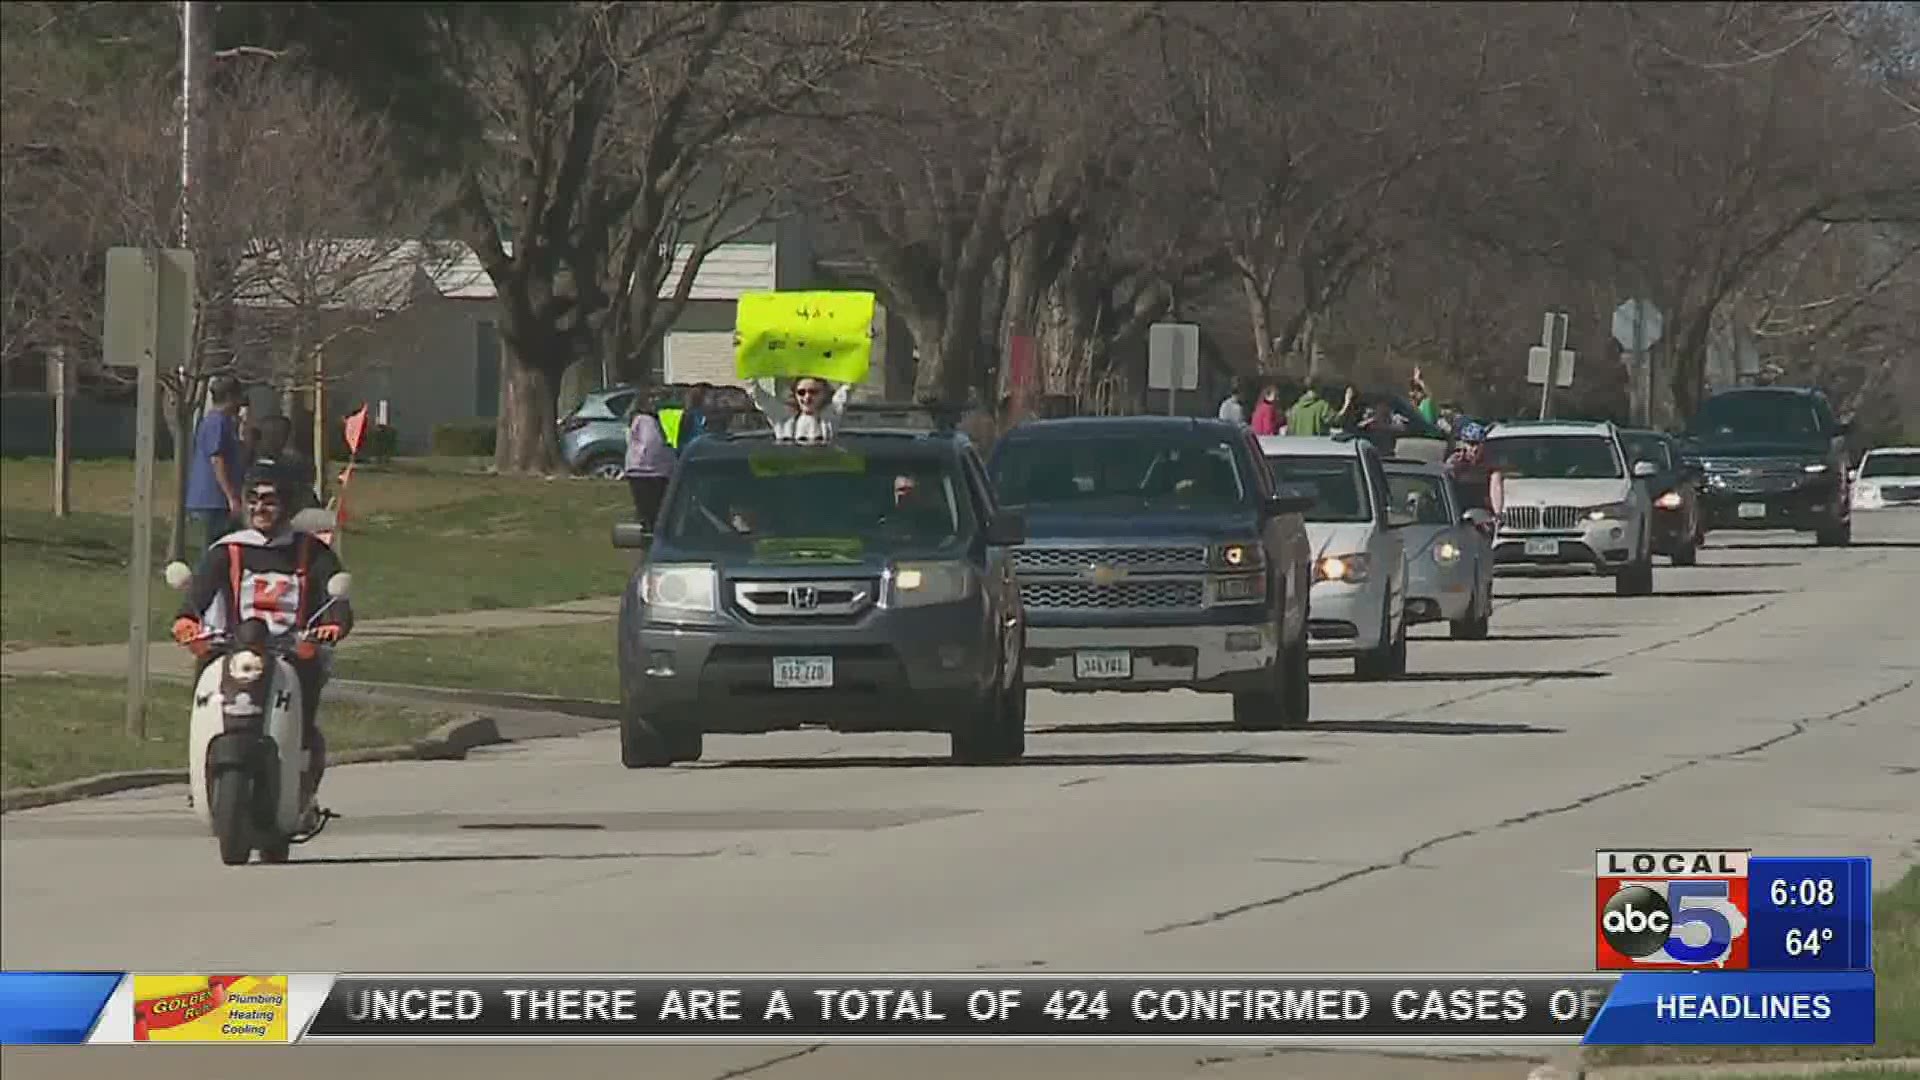 Teachers at Western Hills Elementary held an impromptu parade to show their students that they're still thinking of them.